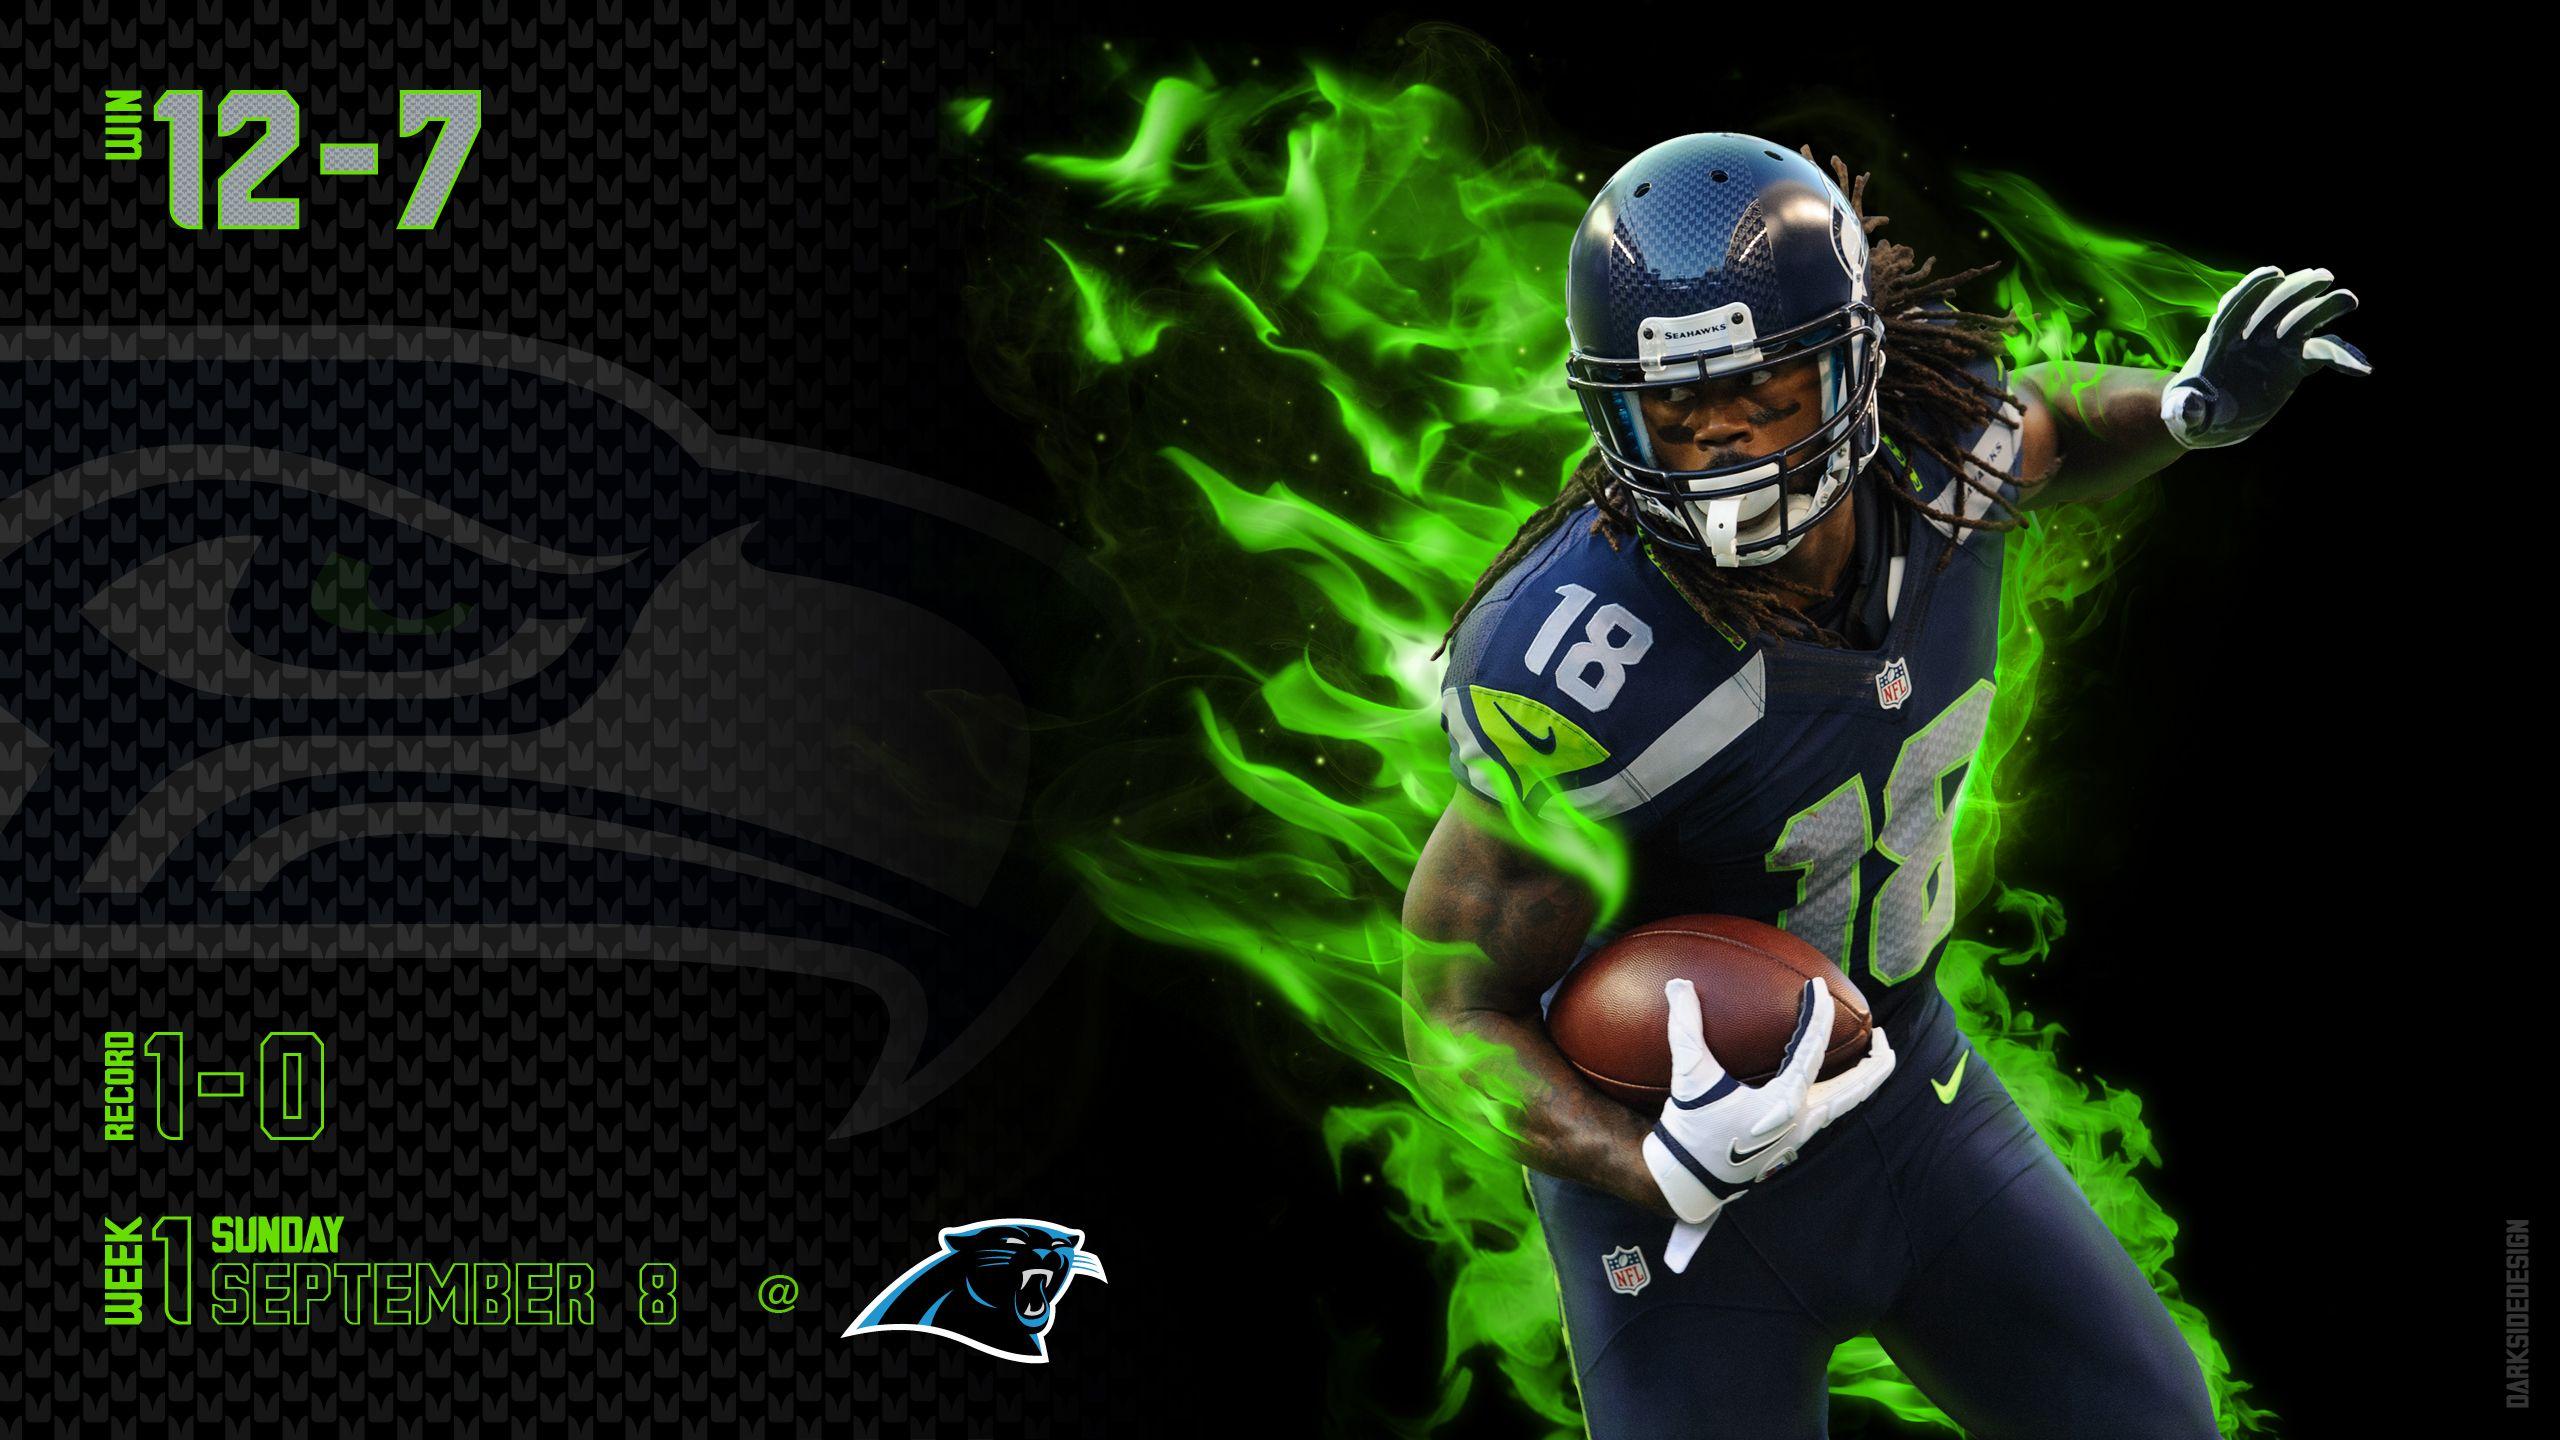 Cool Seahawks Wallpaper for iPhone and Desktop Background